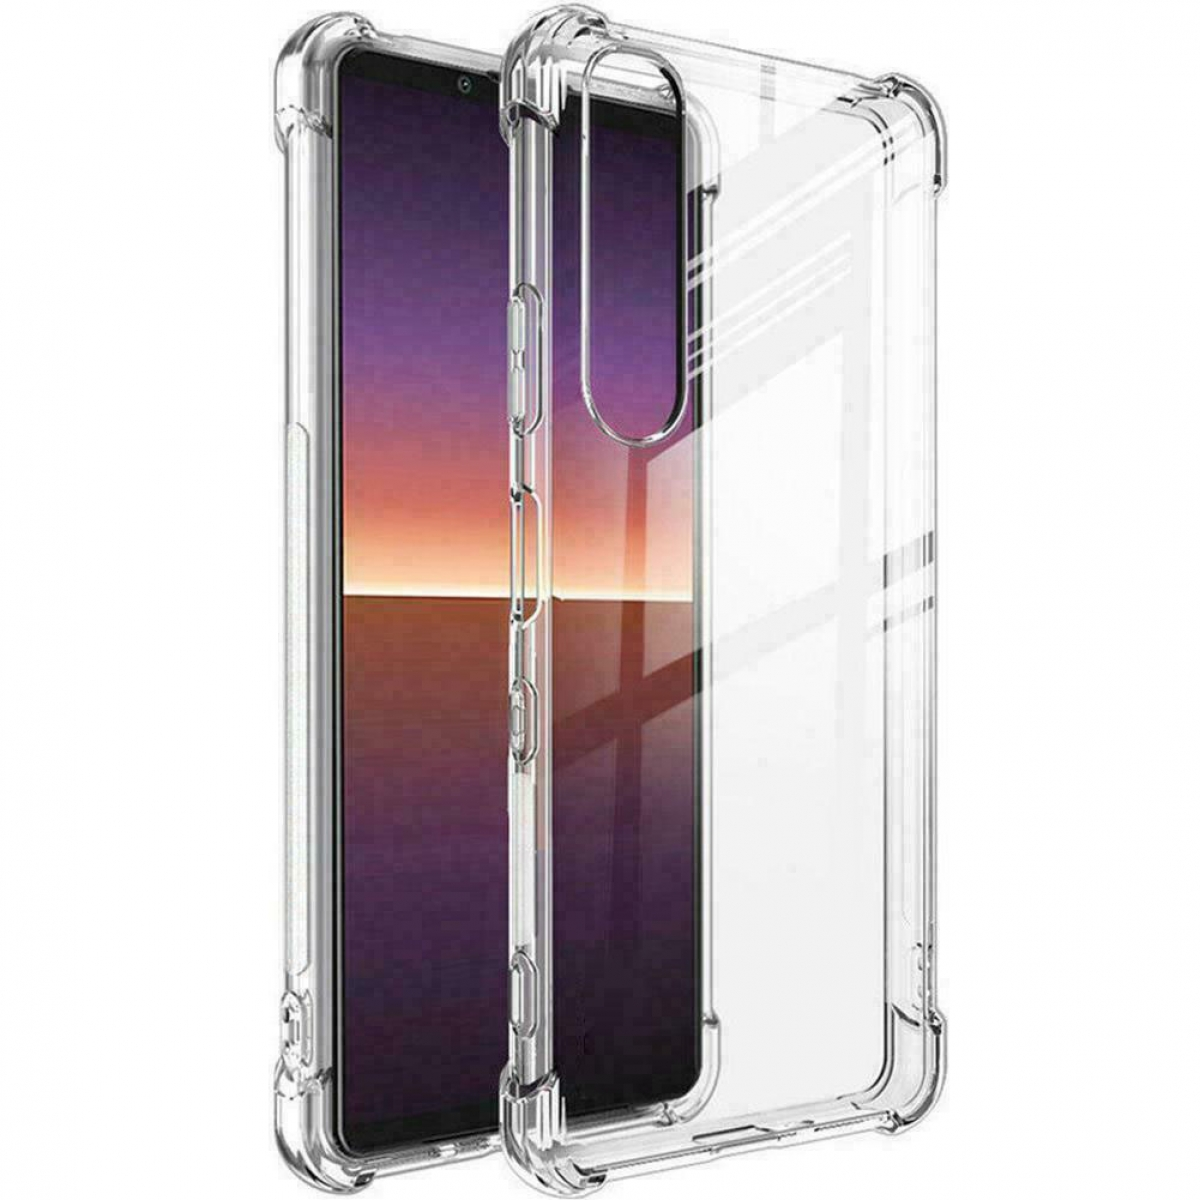 Xperia Sony, III, Multicolor Backcover, Shockproof, 1 CASEONLINE